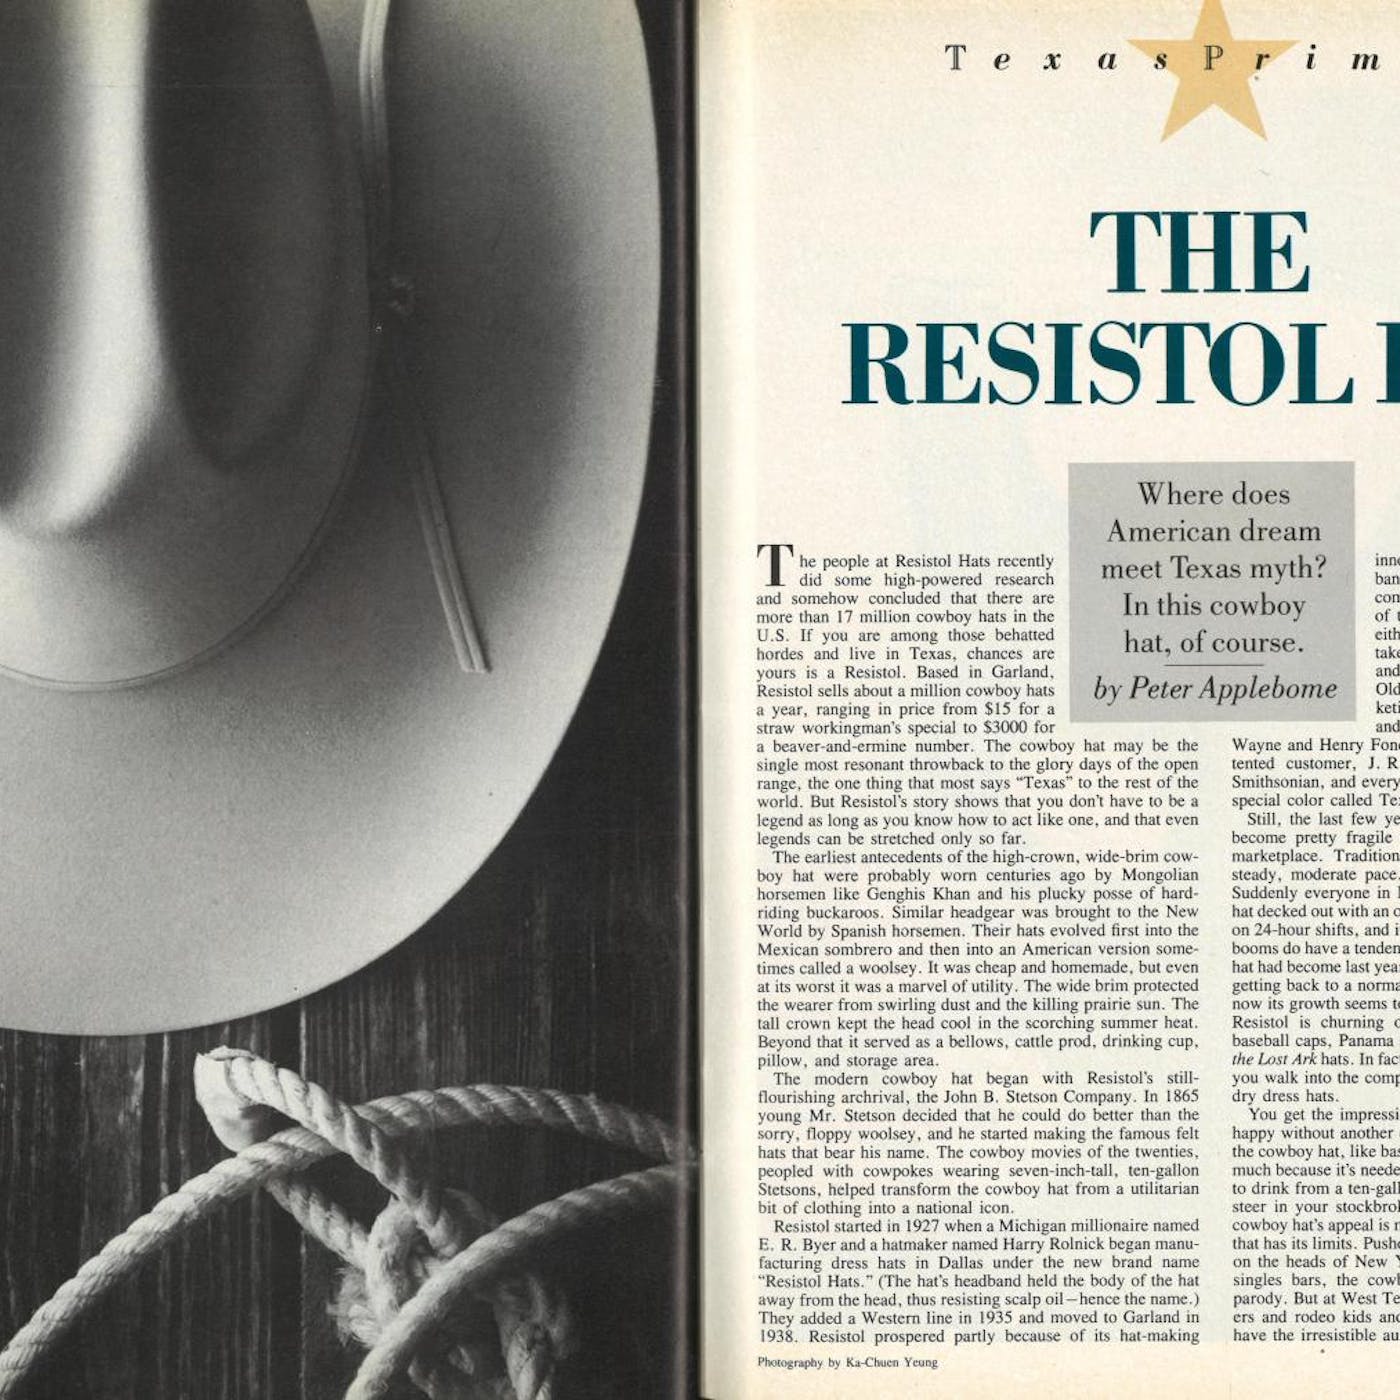 Texas primer the resistol hat â texas monthly